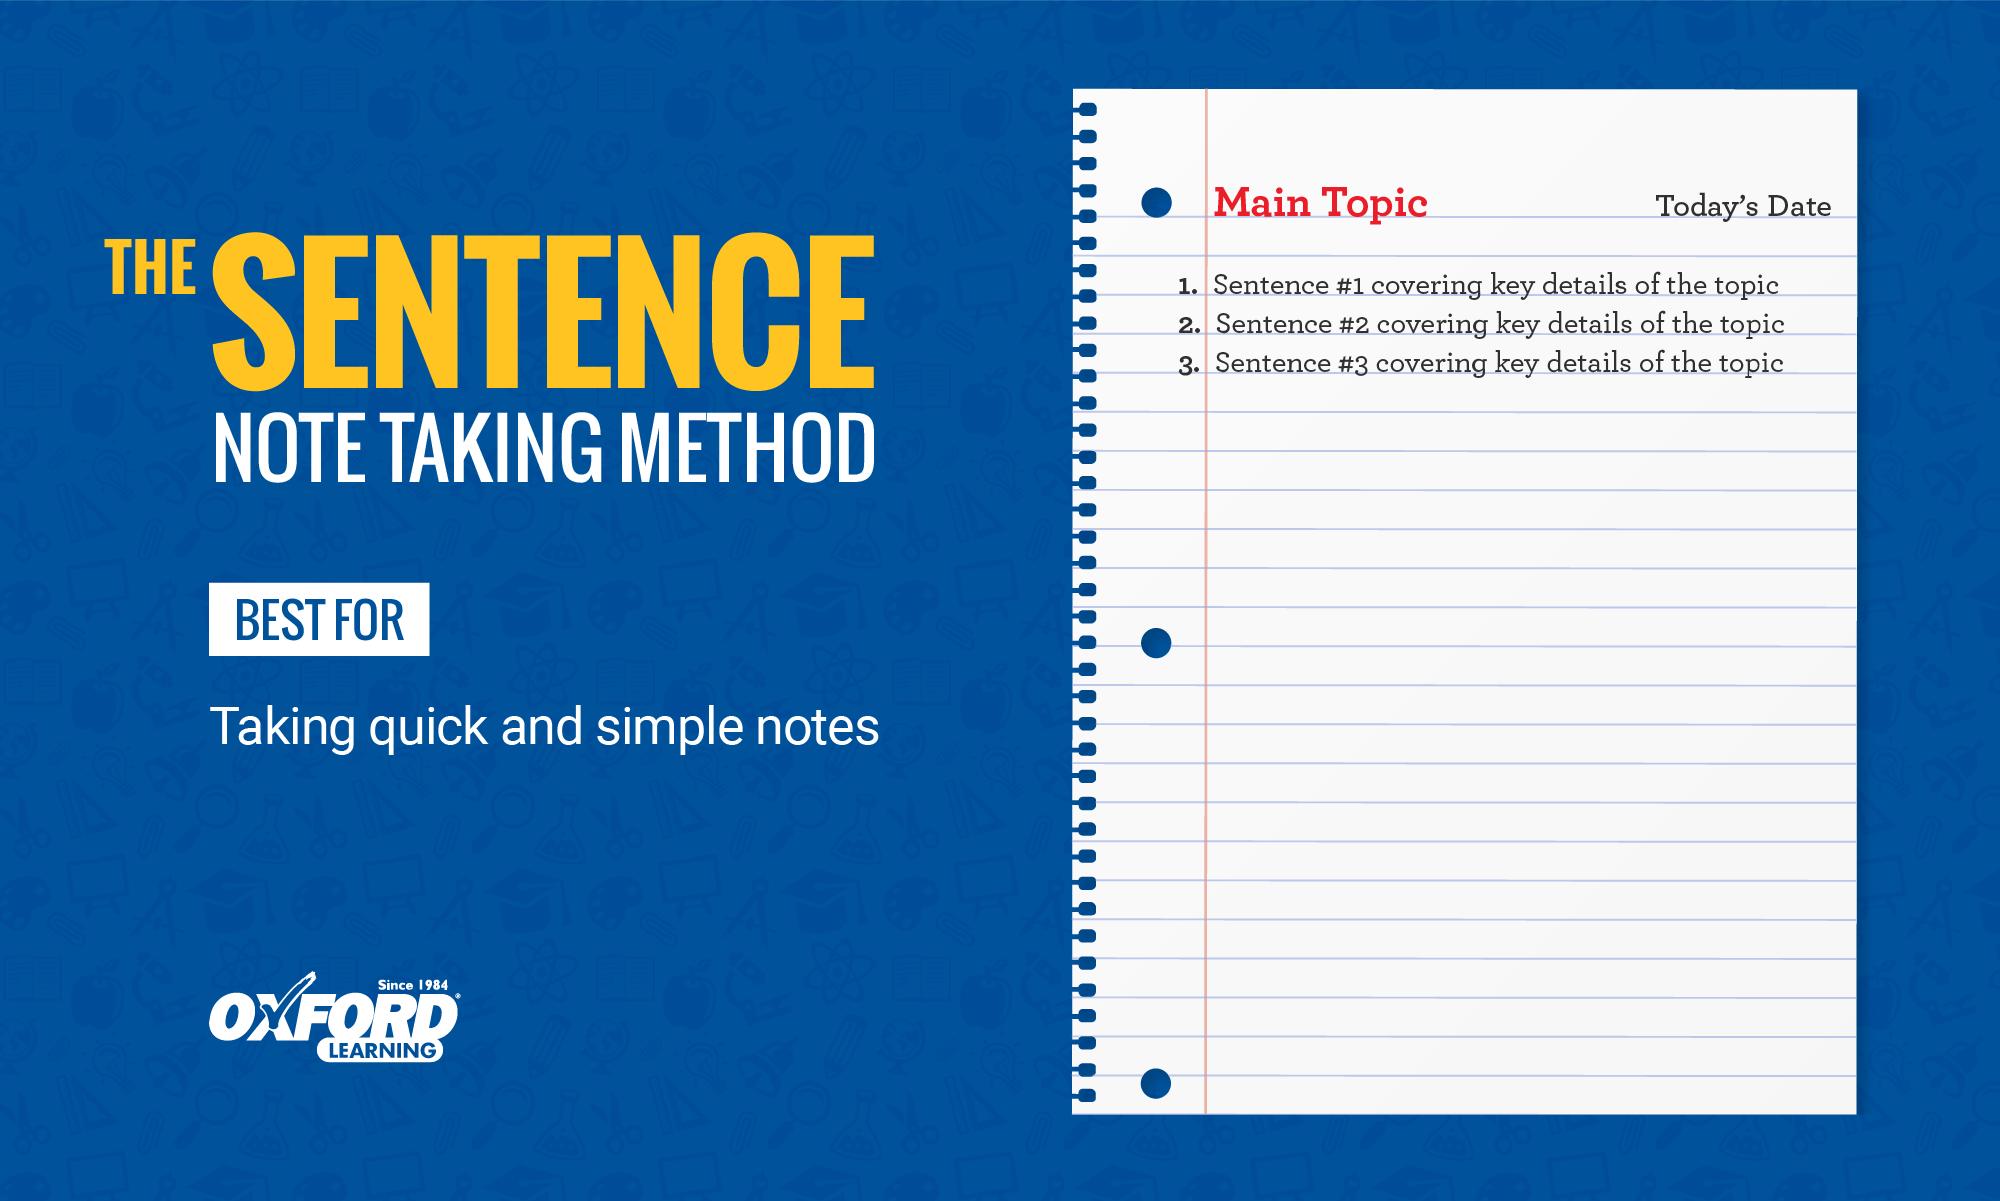 Note Taking, 5 Tips & Methods for Effective Note Taking